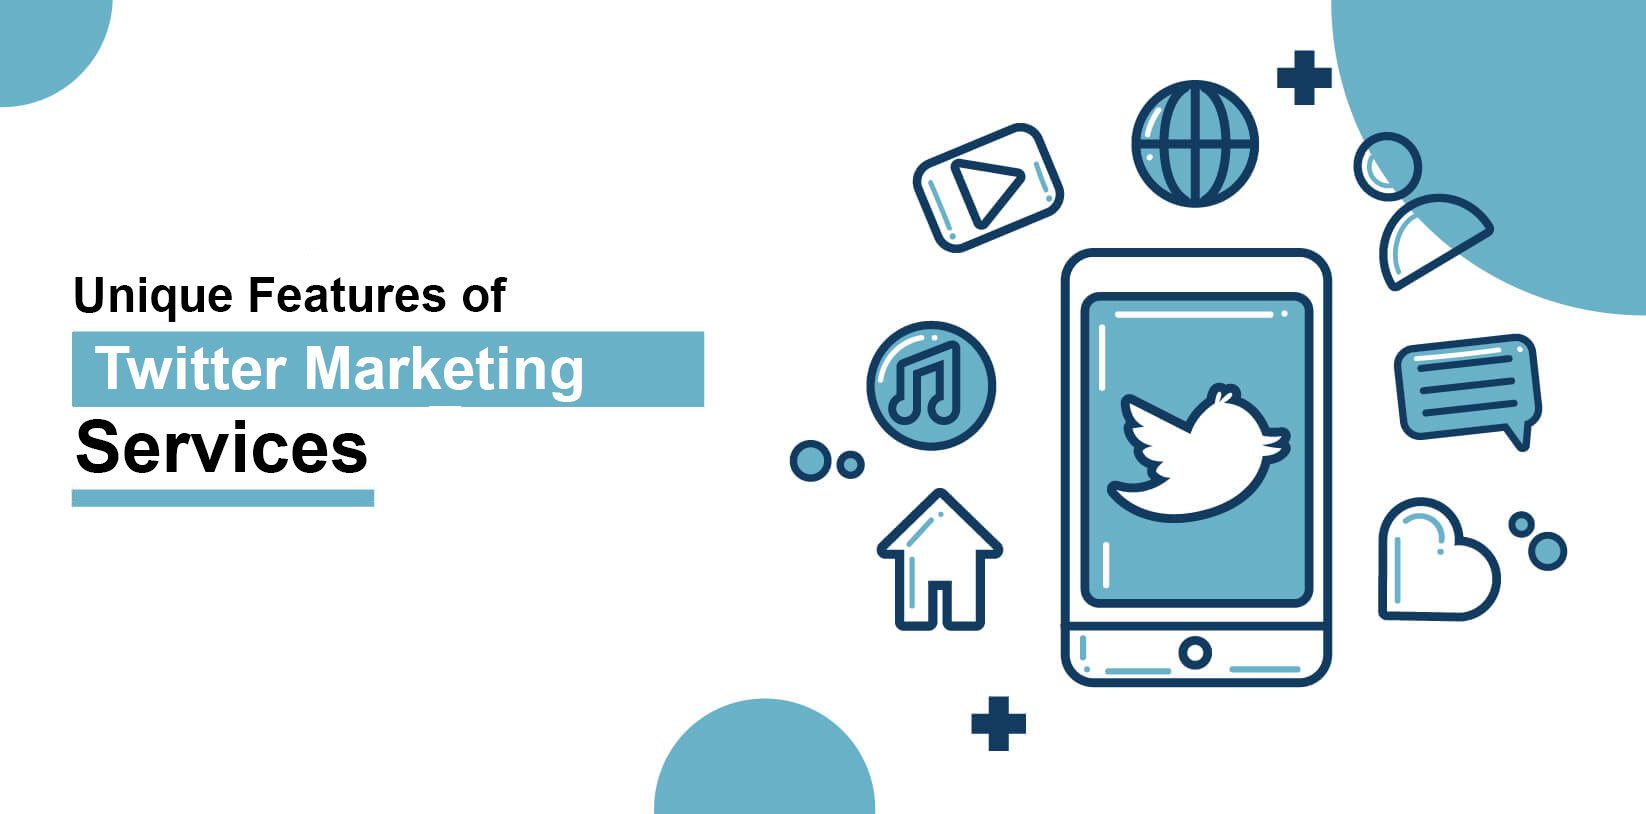 Here are some of the unique features of Twitter marketing services.